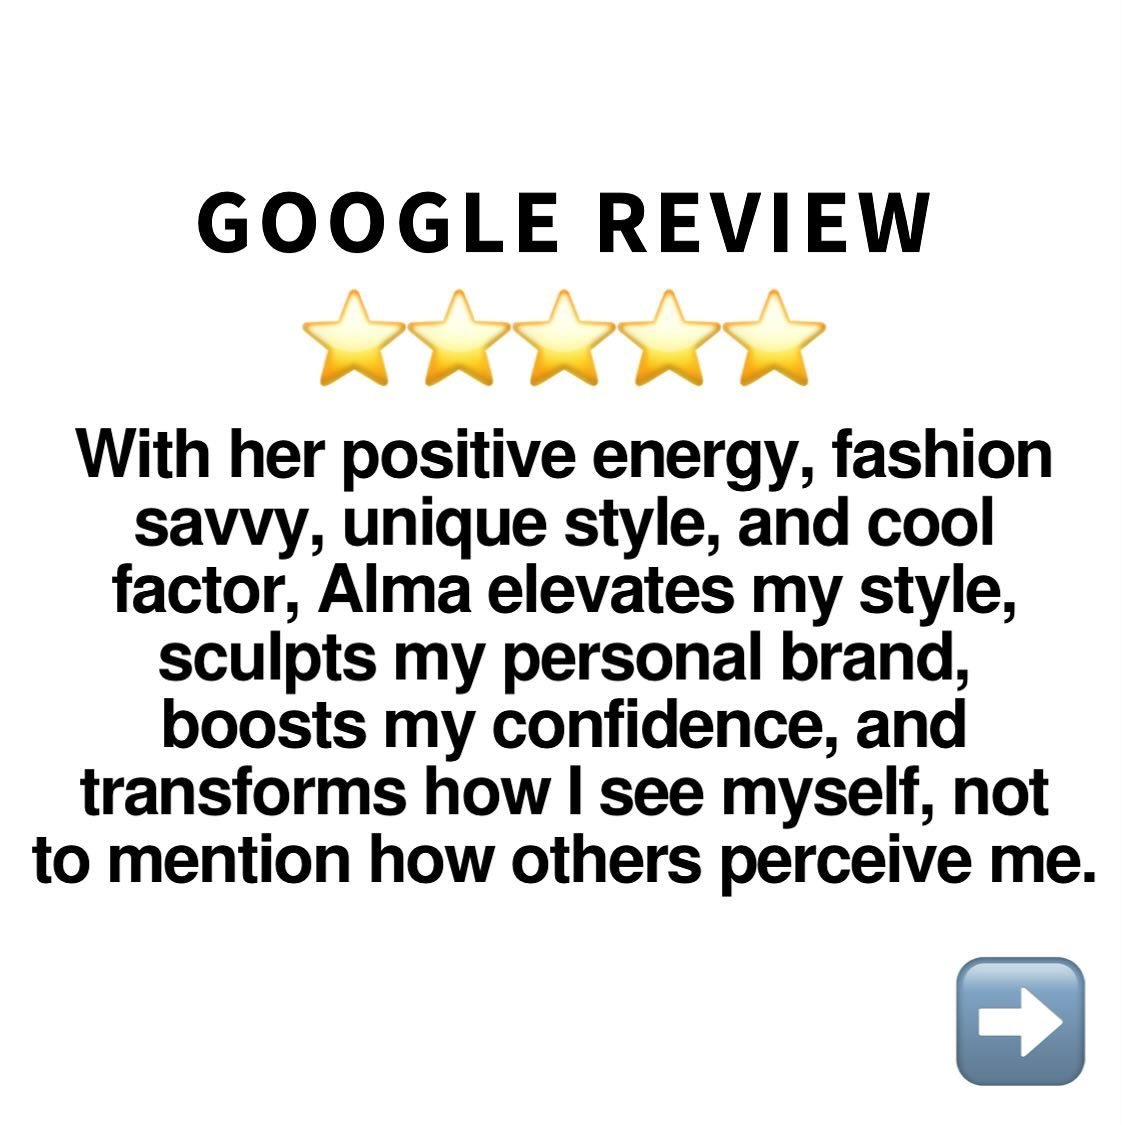 Just received an incredible review from one of my all-time favorite clients! We&rsquo;ve been working together for years, and in the beginning, it was a bit of a tug of war as she adjusted to seeing herself in new colors and silhouettes. But now, we 